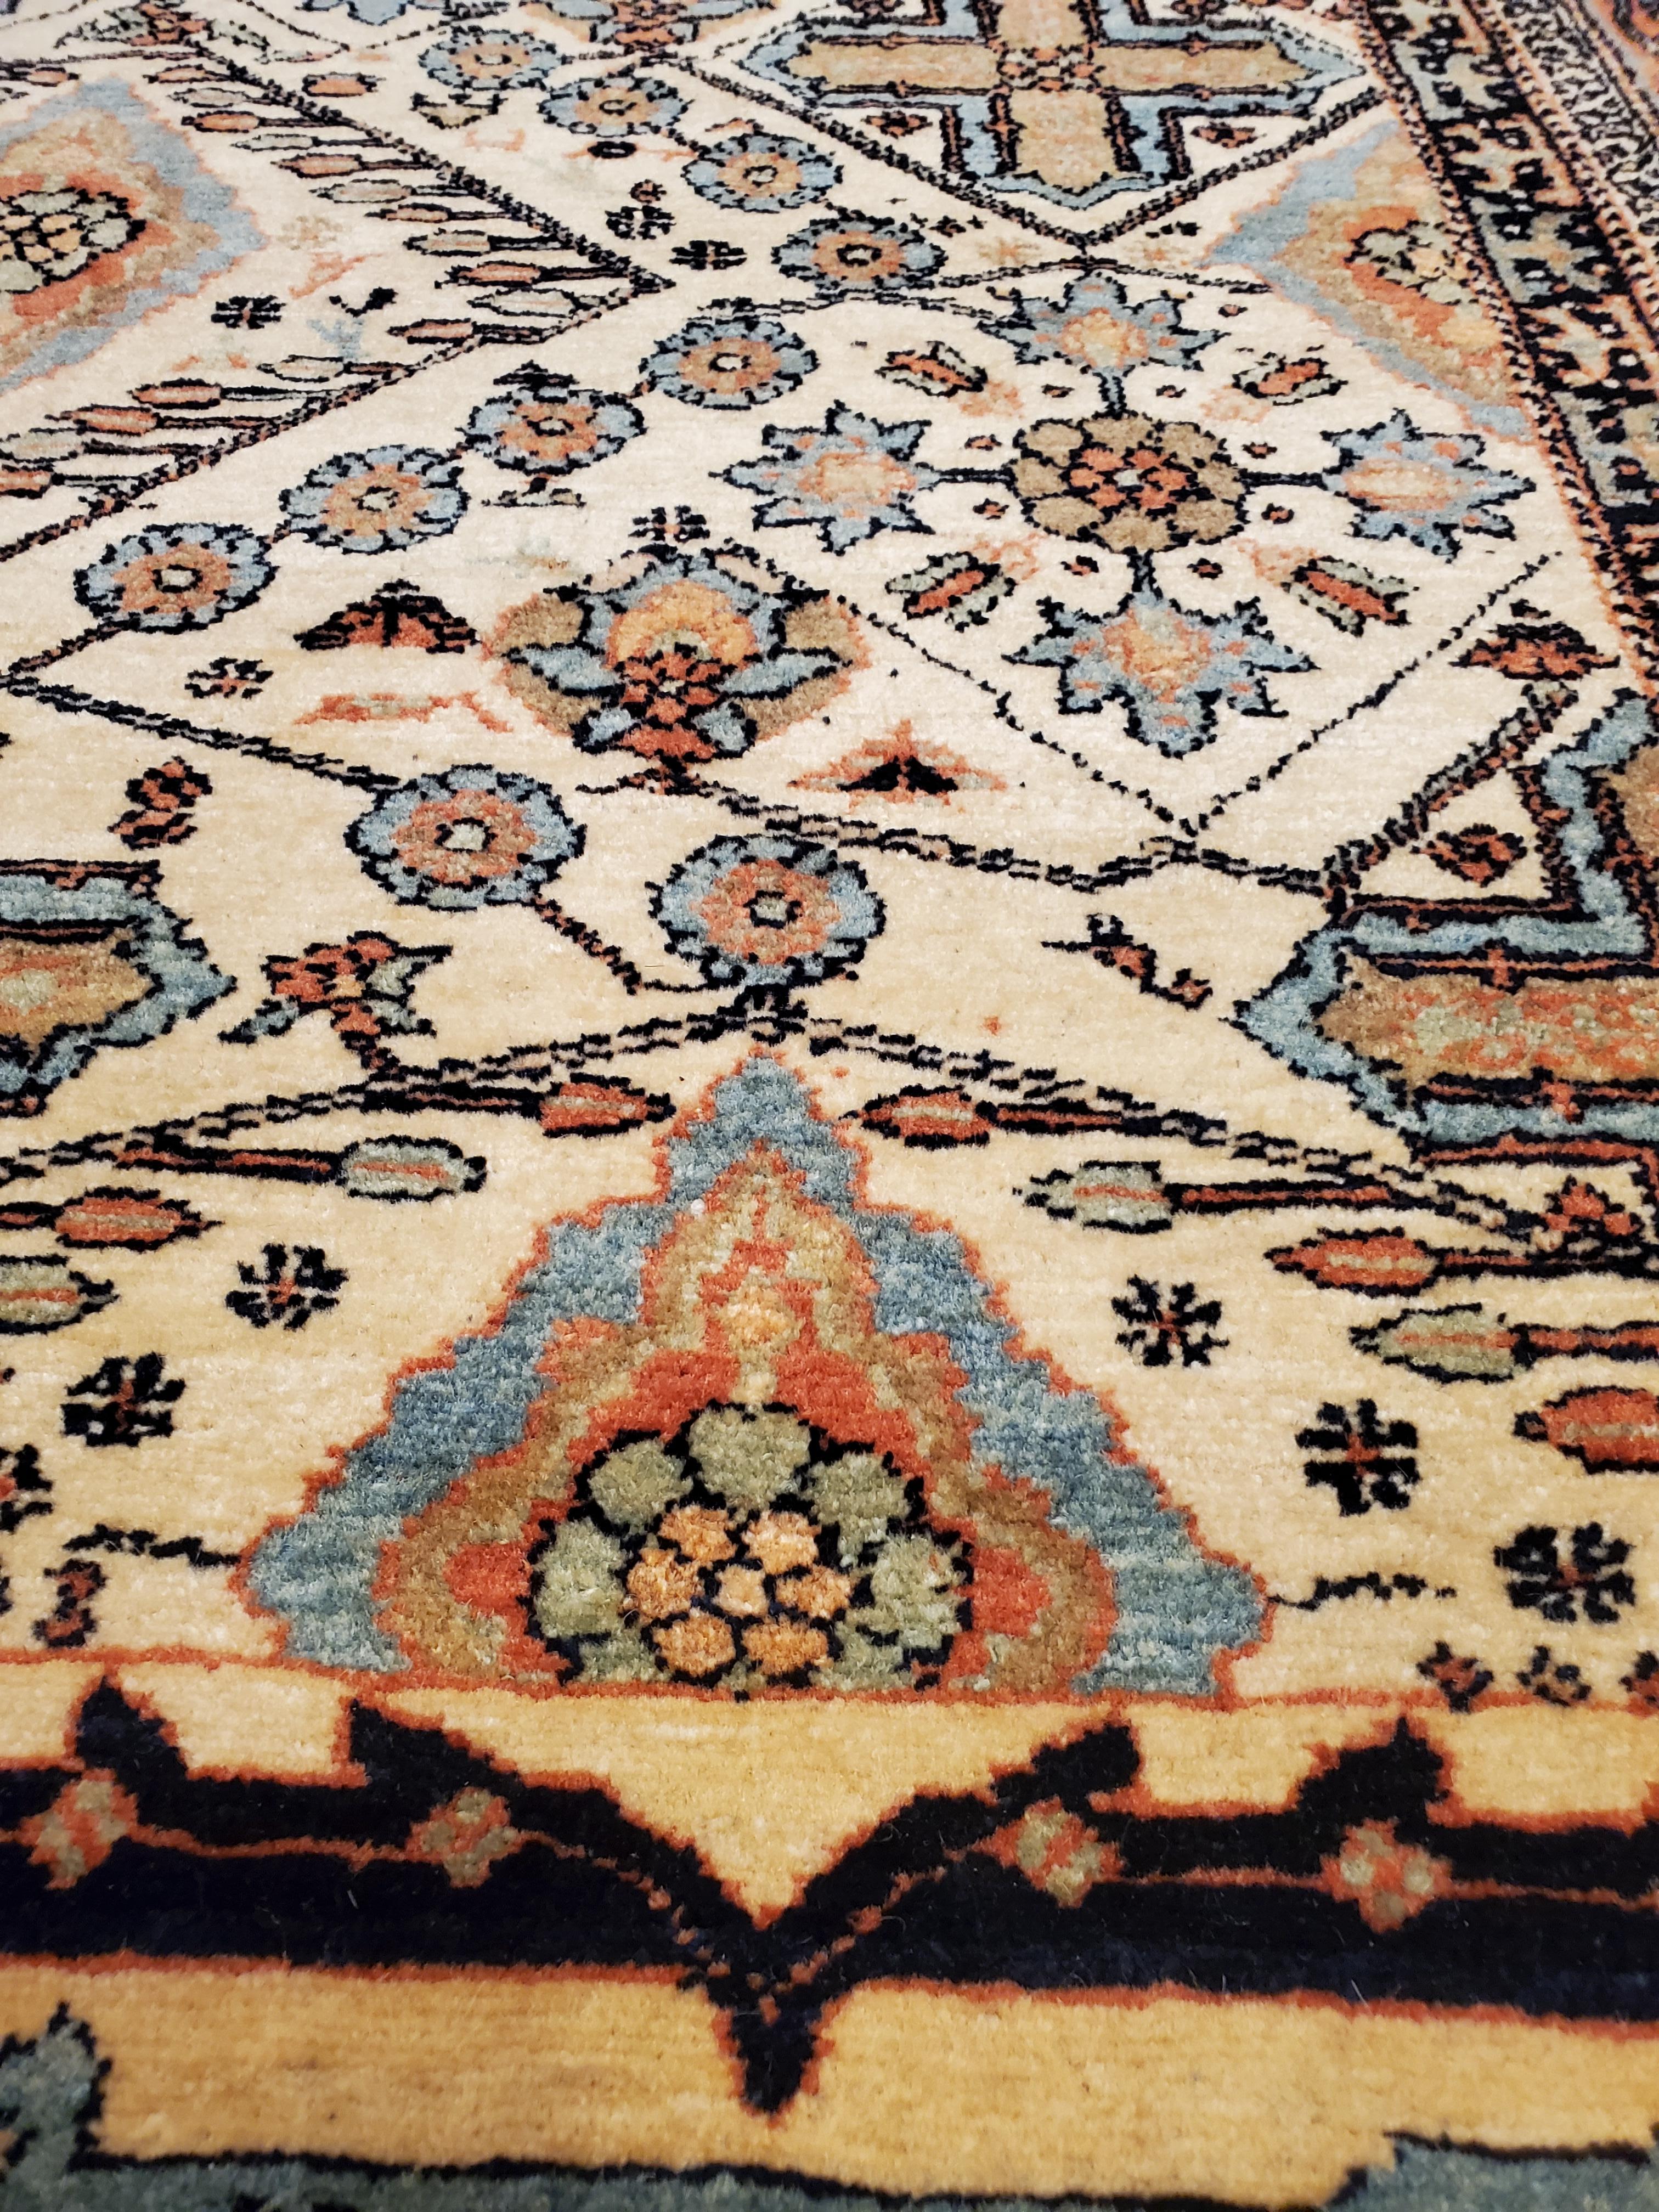 Antique Persian Bakhshaish Carpet, Handmade Wool Rug, Ivory and Rust For Sale 4